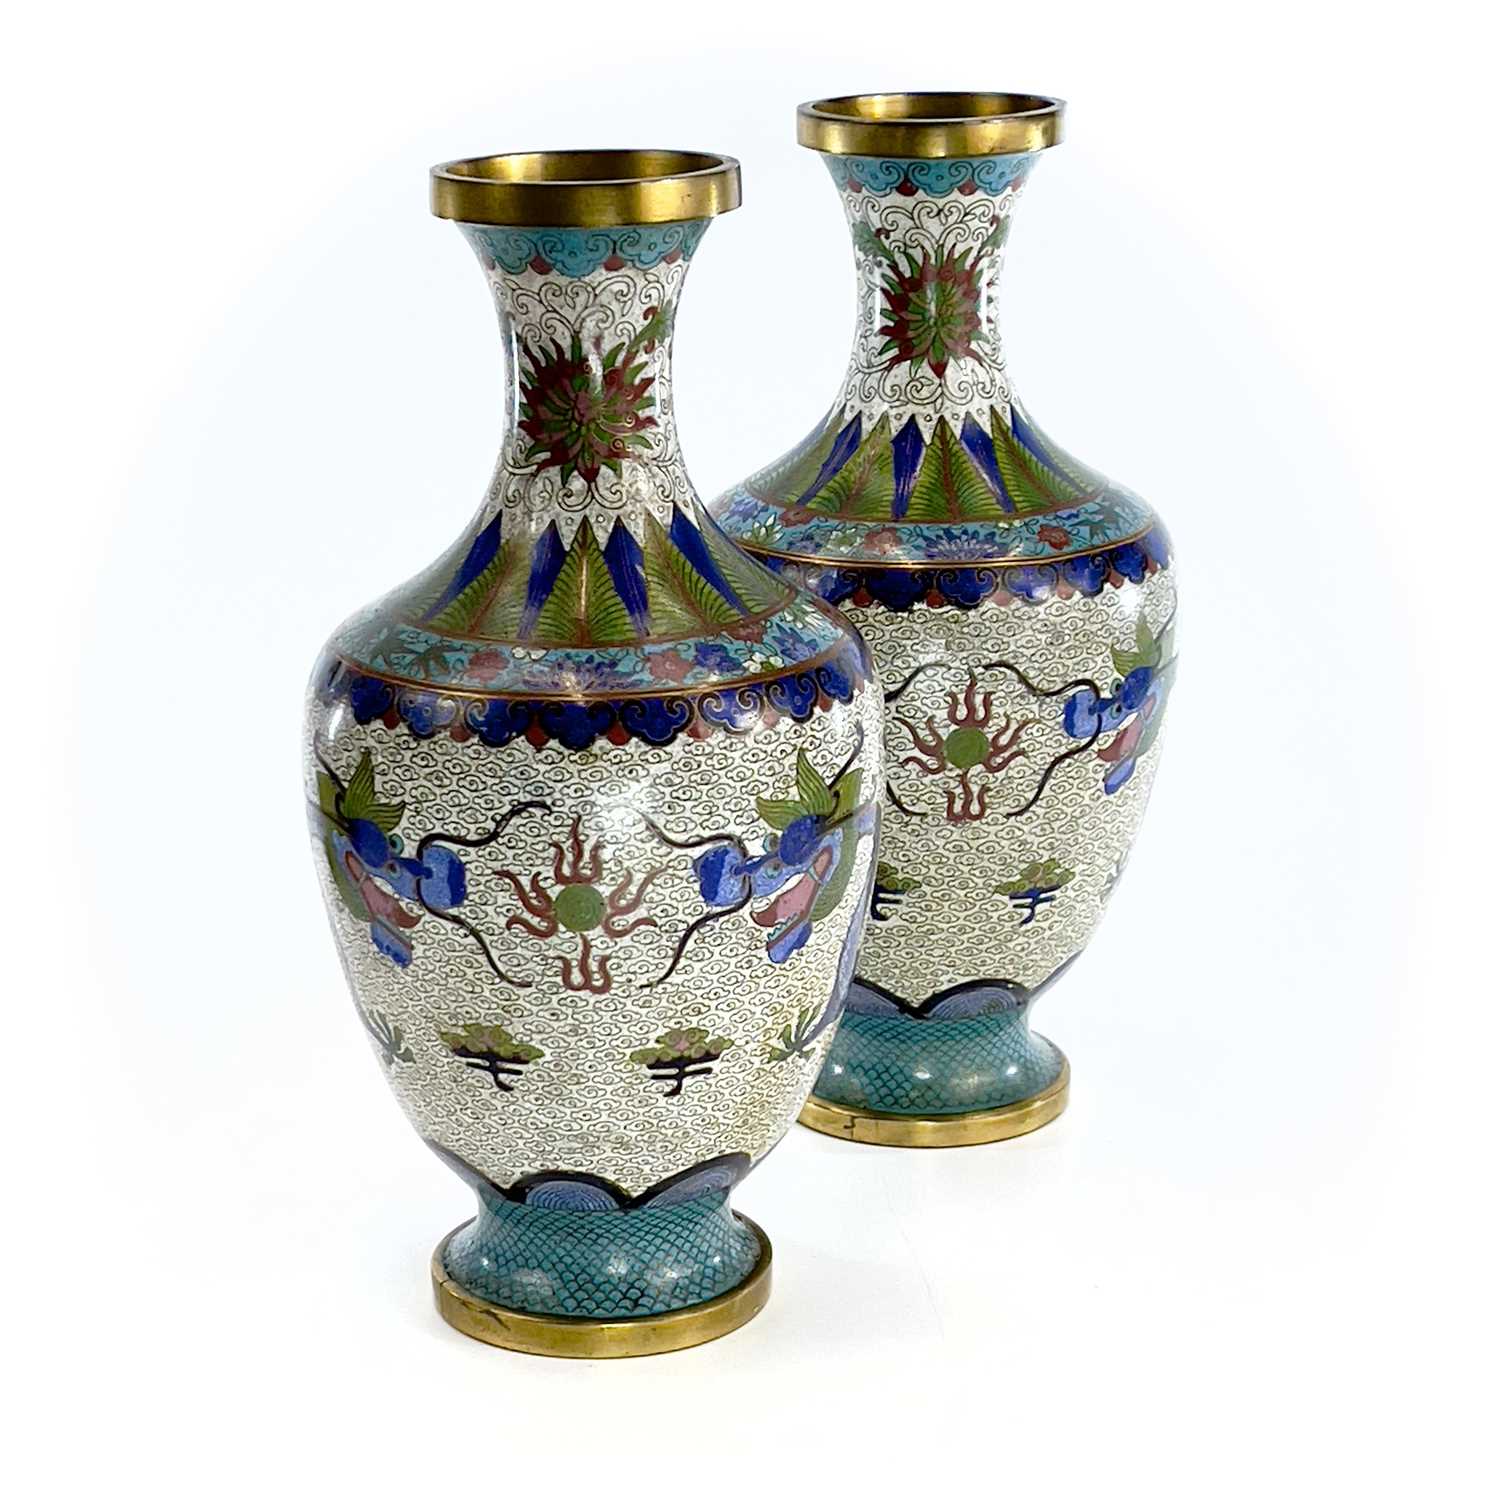 A pair of Chinese cloisonne vases, early 20th century, the white ground decorated with dragons